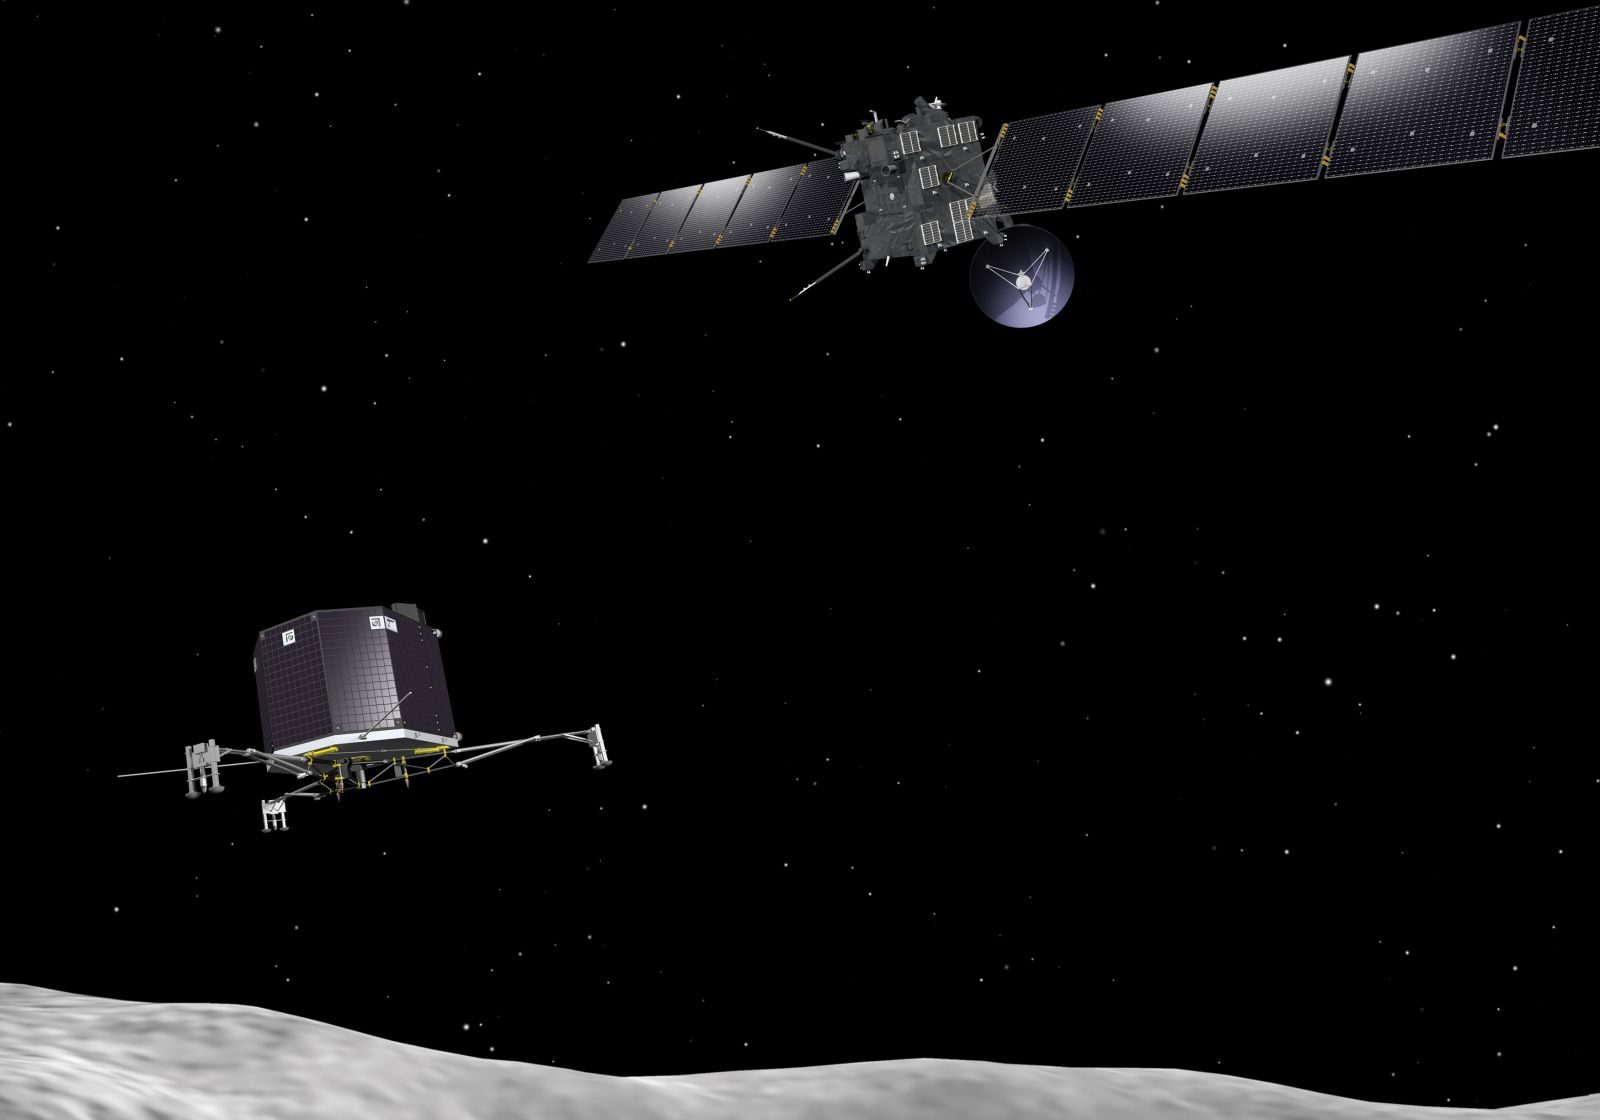 Artist impression of Rosetta and Philae at the comet